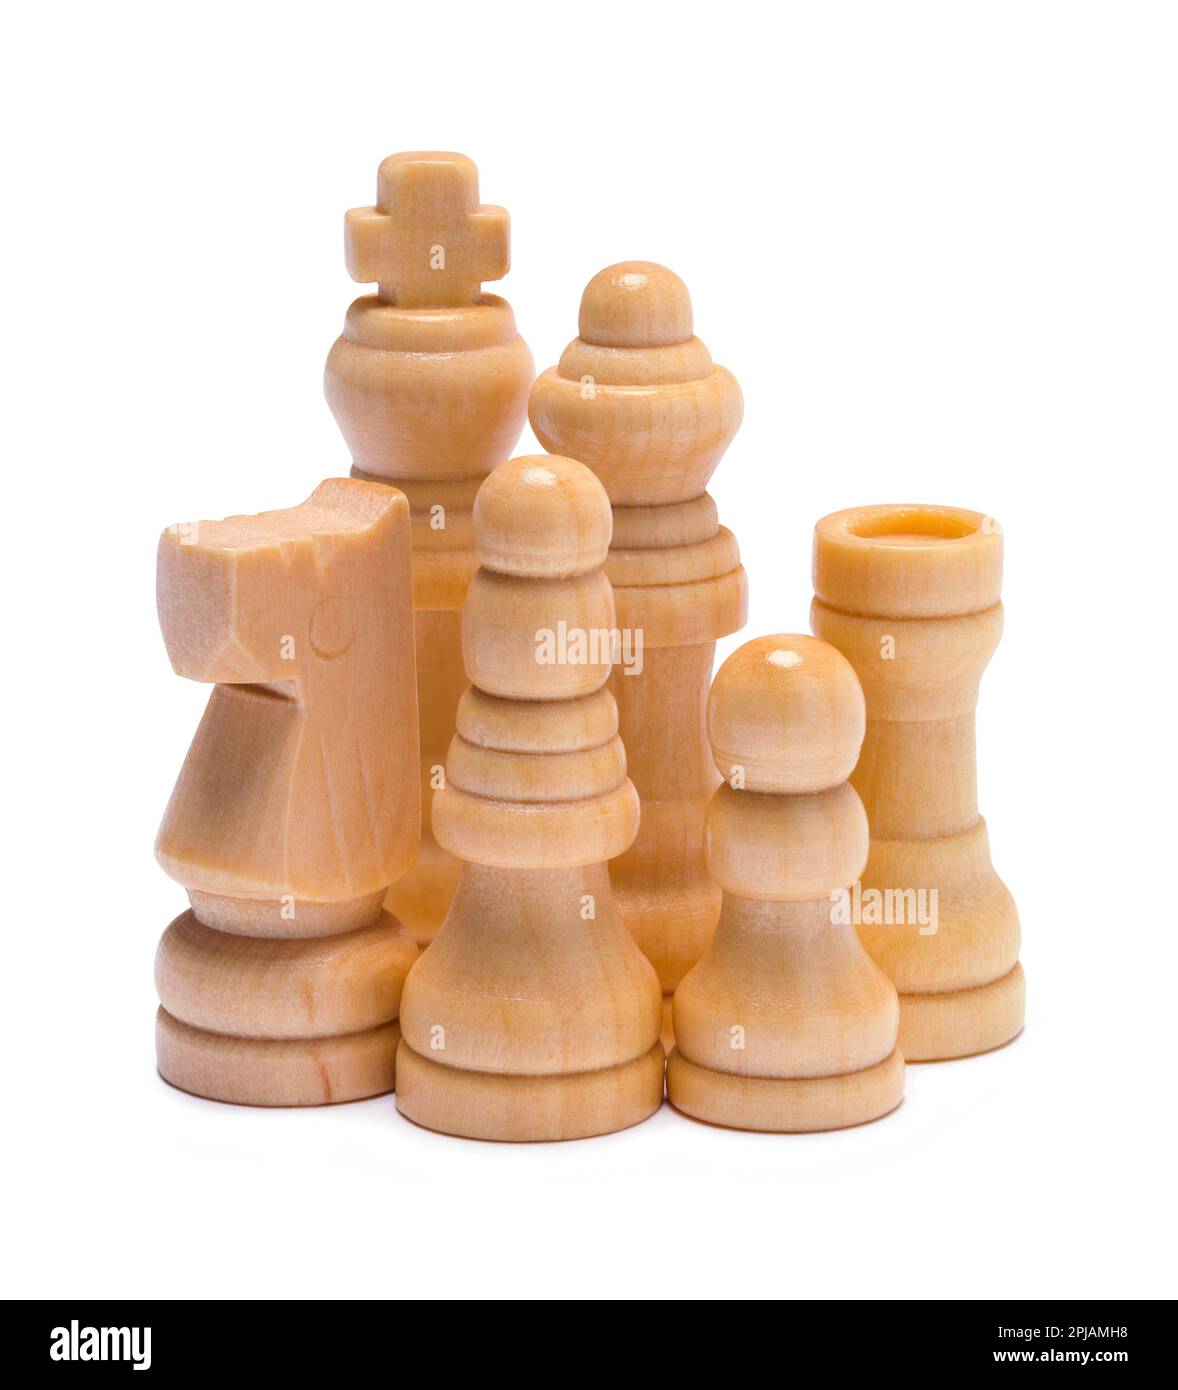 Wood Chess Pieces Cut Out on White. Stock Photo